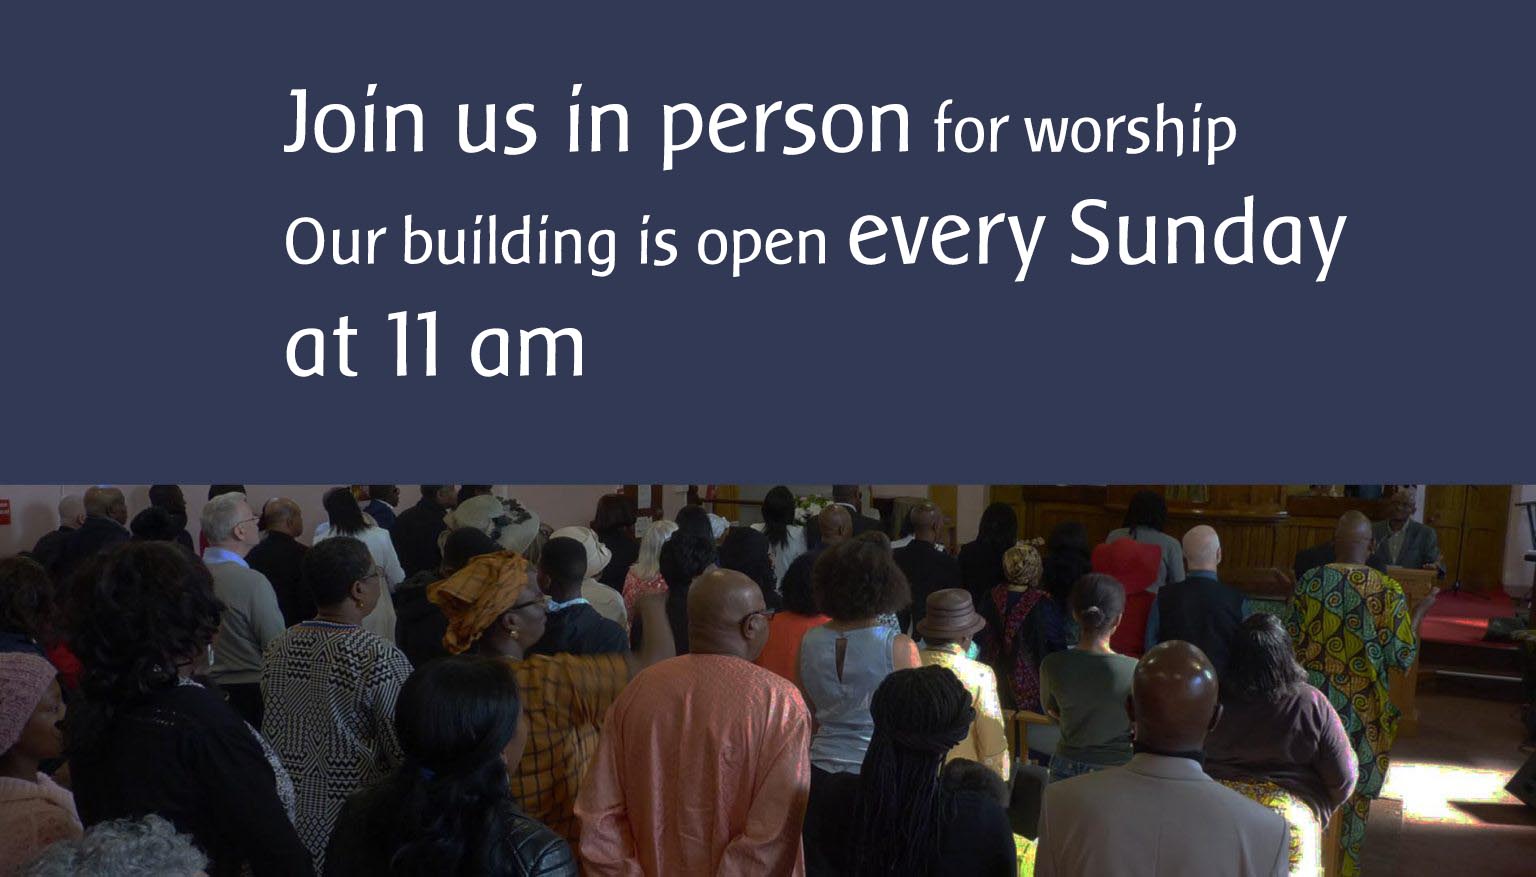 Sunday service in building